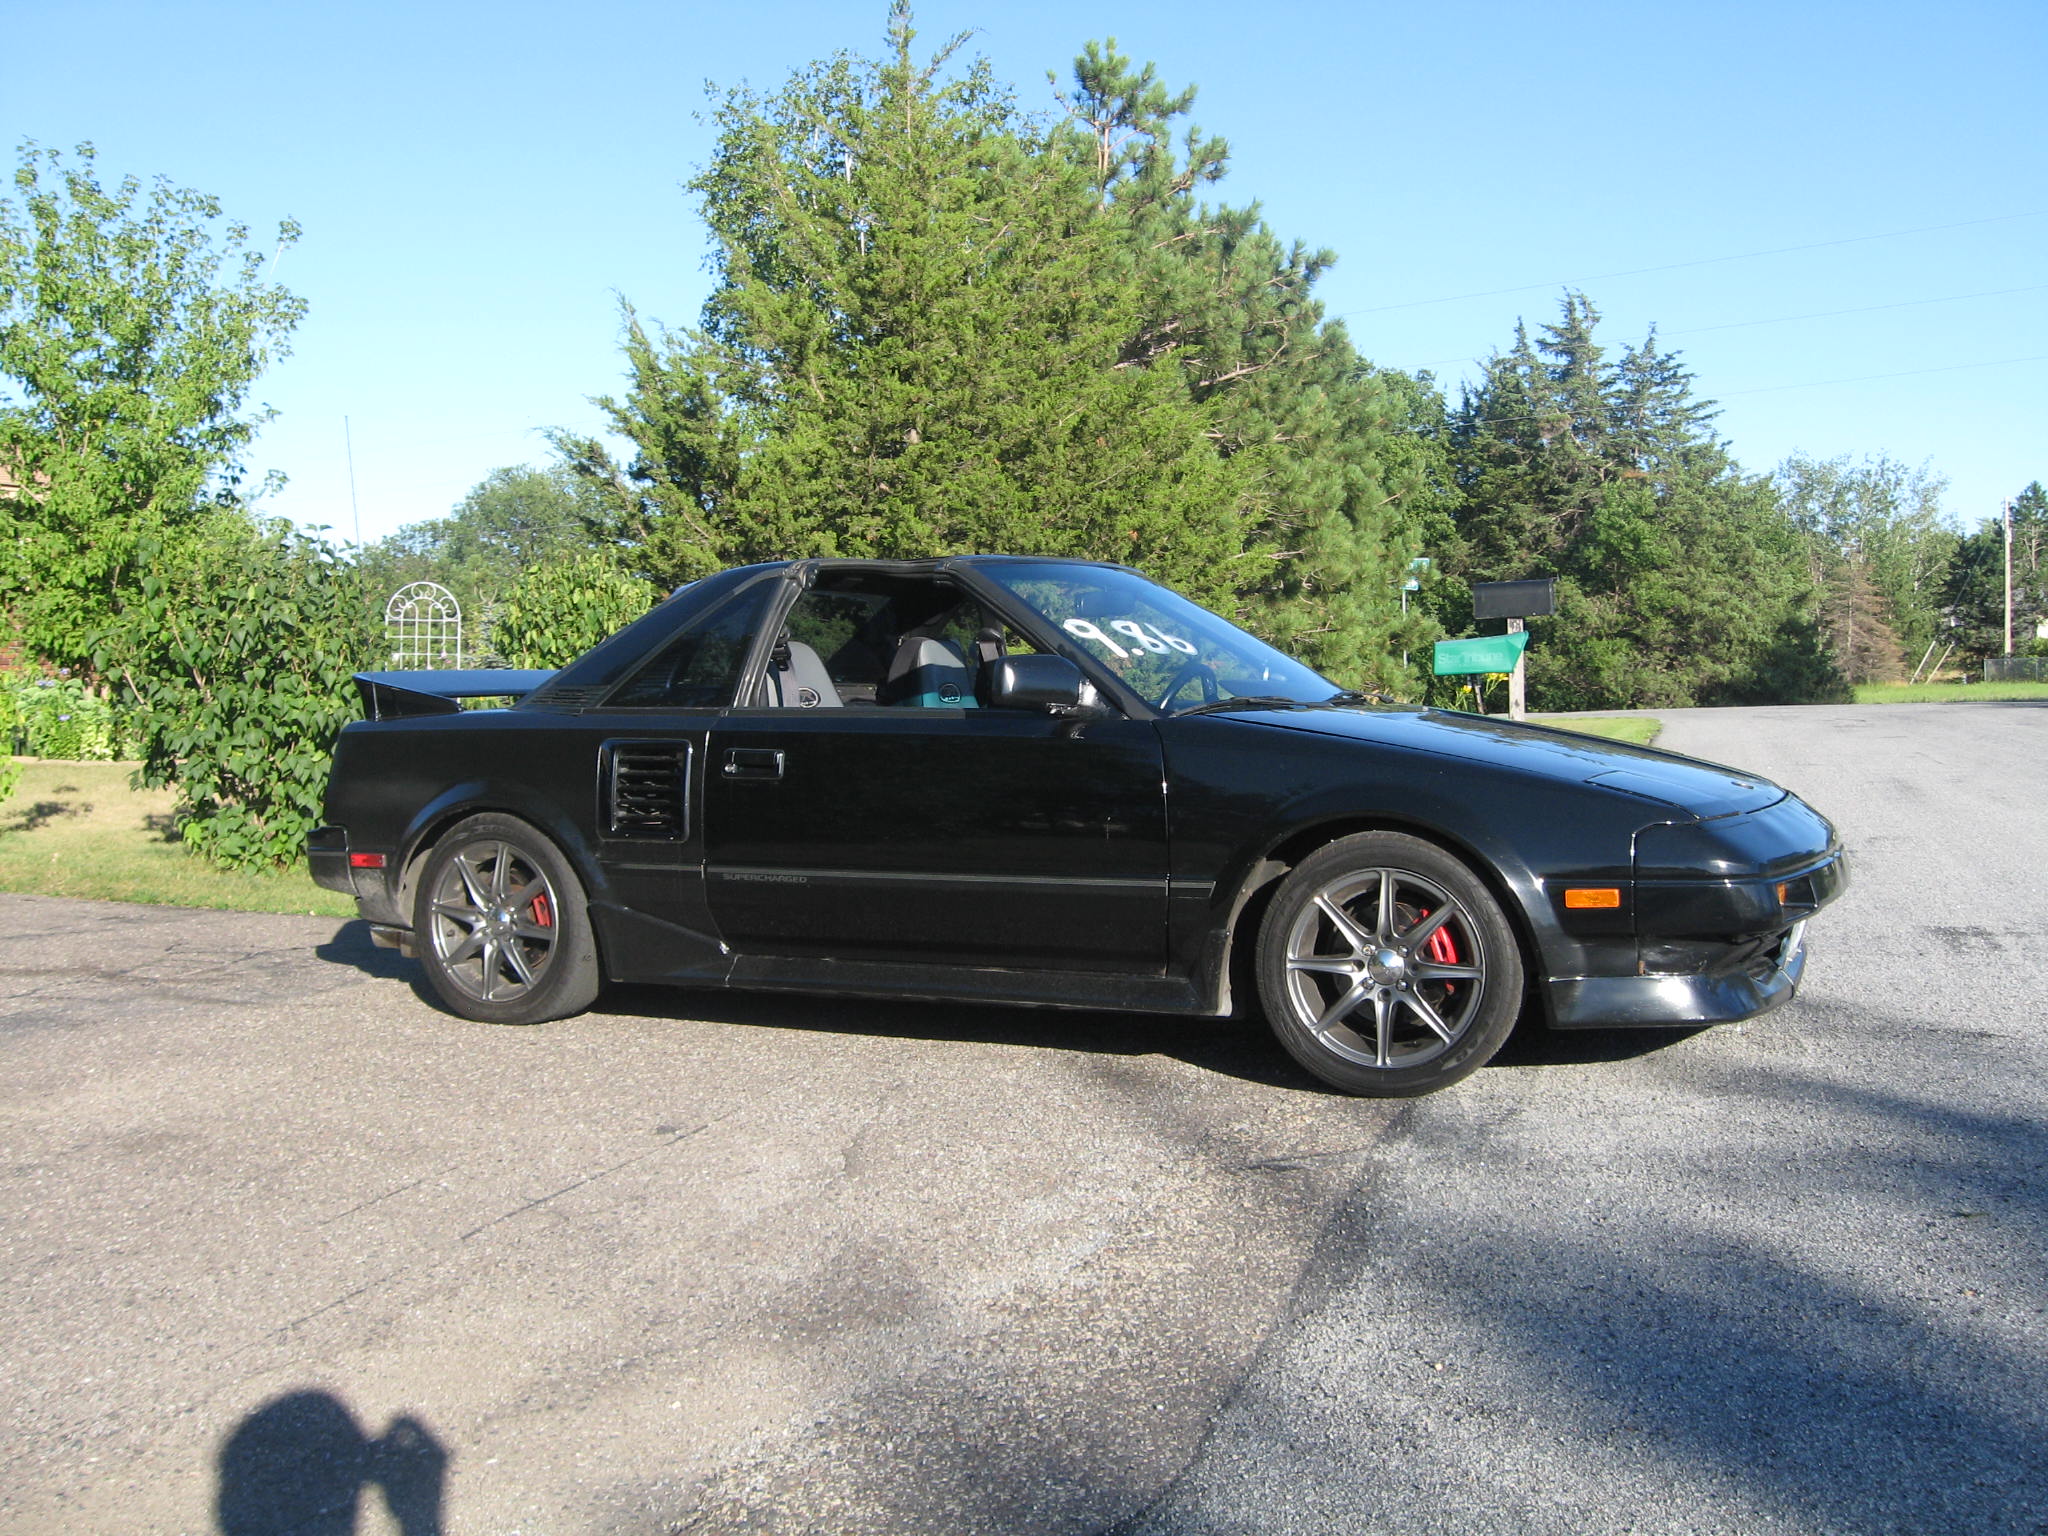  1989 Toyota MR2 Supercharged